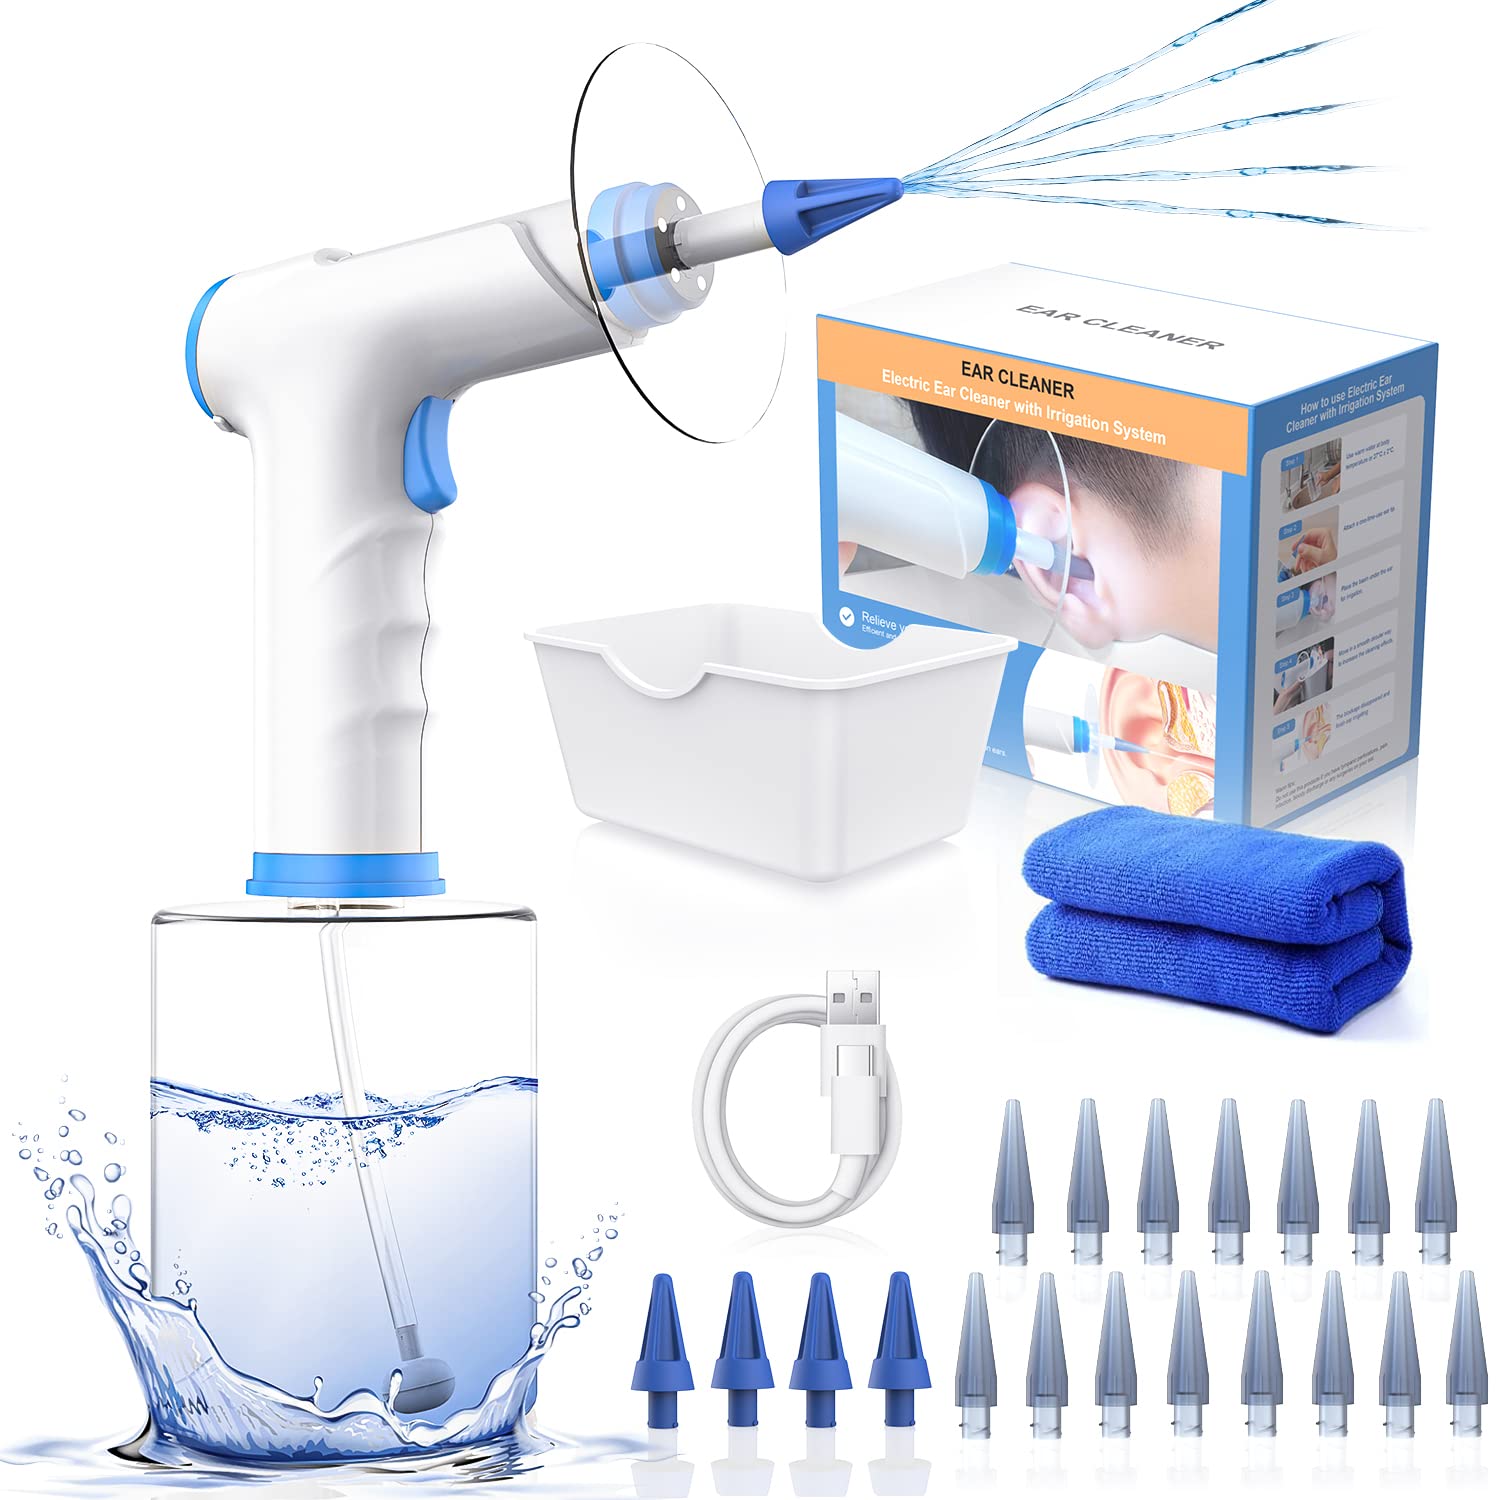  Ear Wax Removal, Electric Ear Cleaning Kit with Light, Ear  Irrigation Kit with 4 Pressure Modes, Safe and Effective Ear Flush Kit with  Ear Cleaner - Includes Basin, Towel & 15